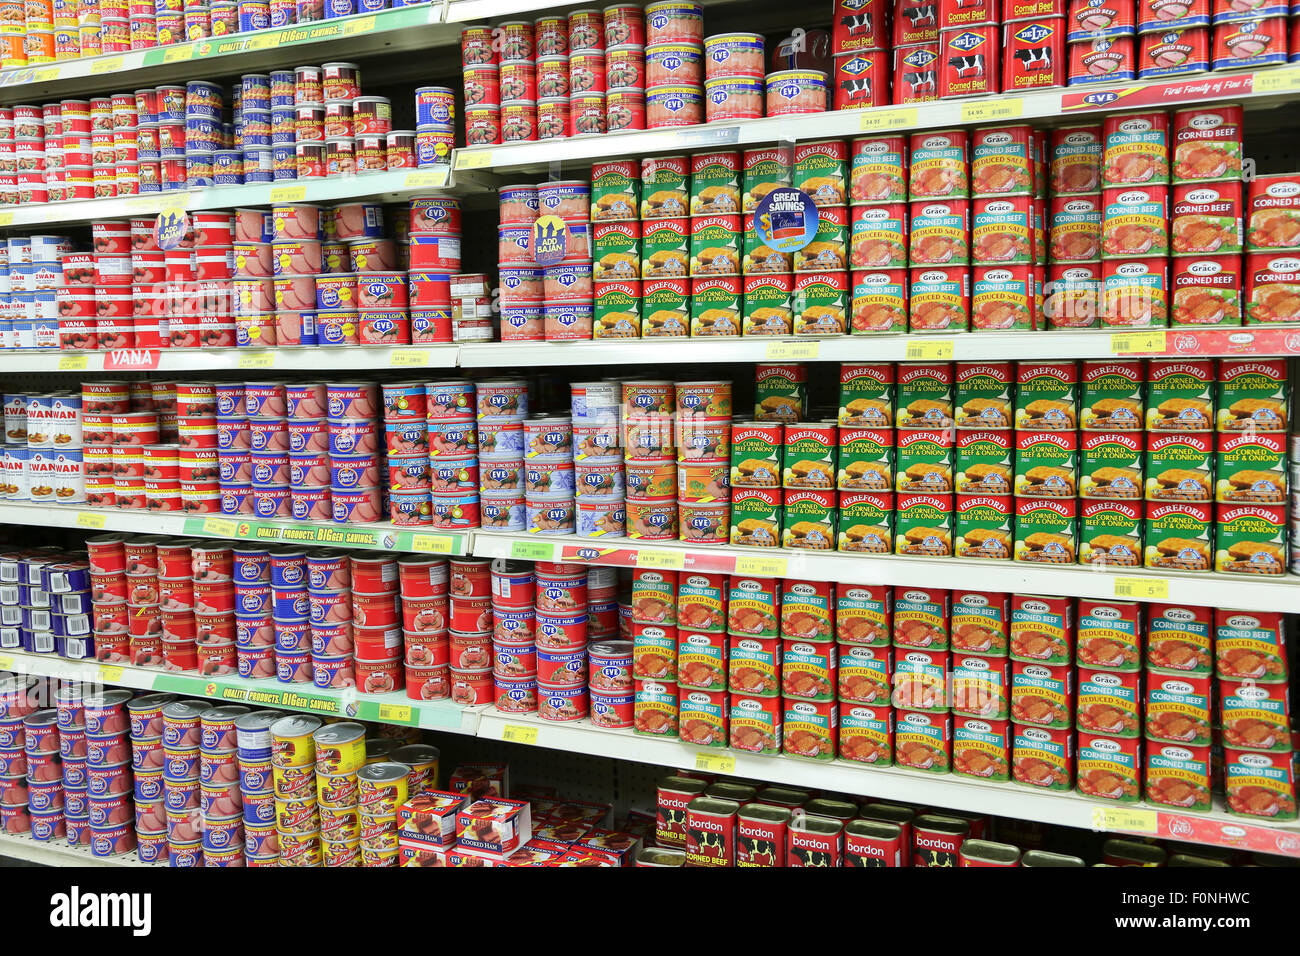 CANNED MEAT PRODUCTS IN TROPICAL SUPERMARKET Stock Photo